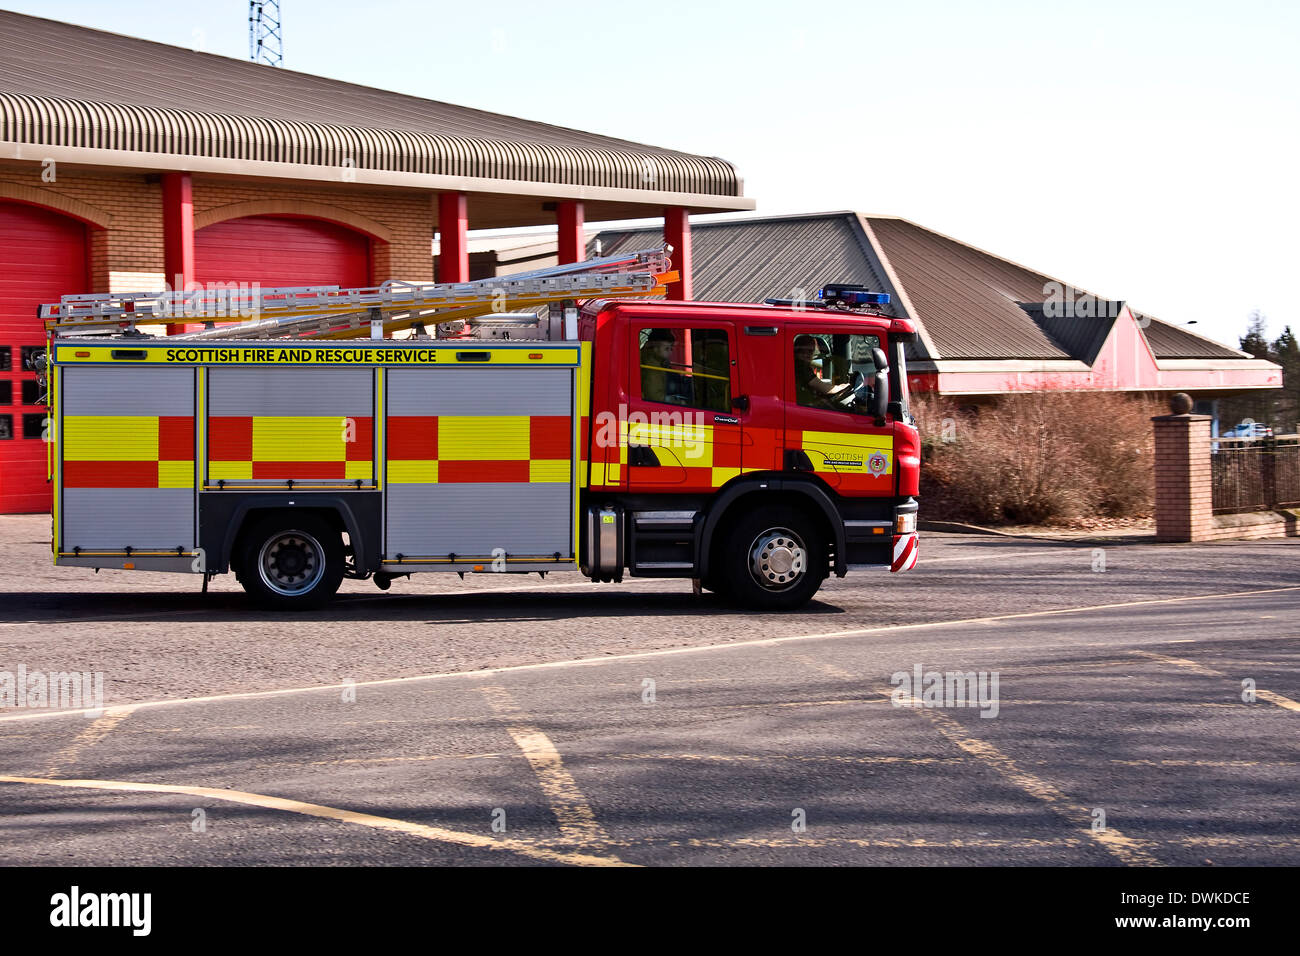 Scottish Fire And Rescue Service truck leaving the fire station responding to a 999 emergency call in Dundee, UK Stock Photo